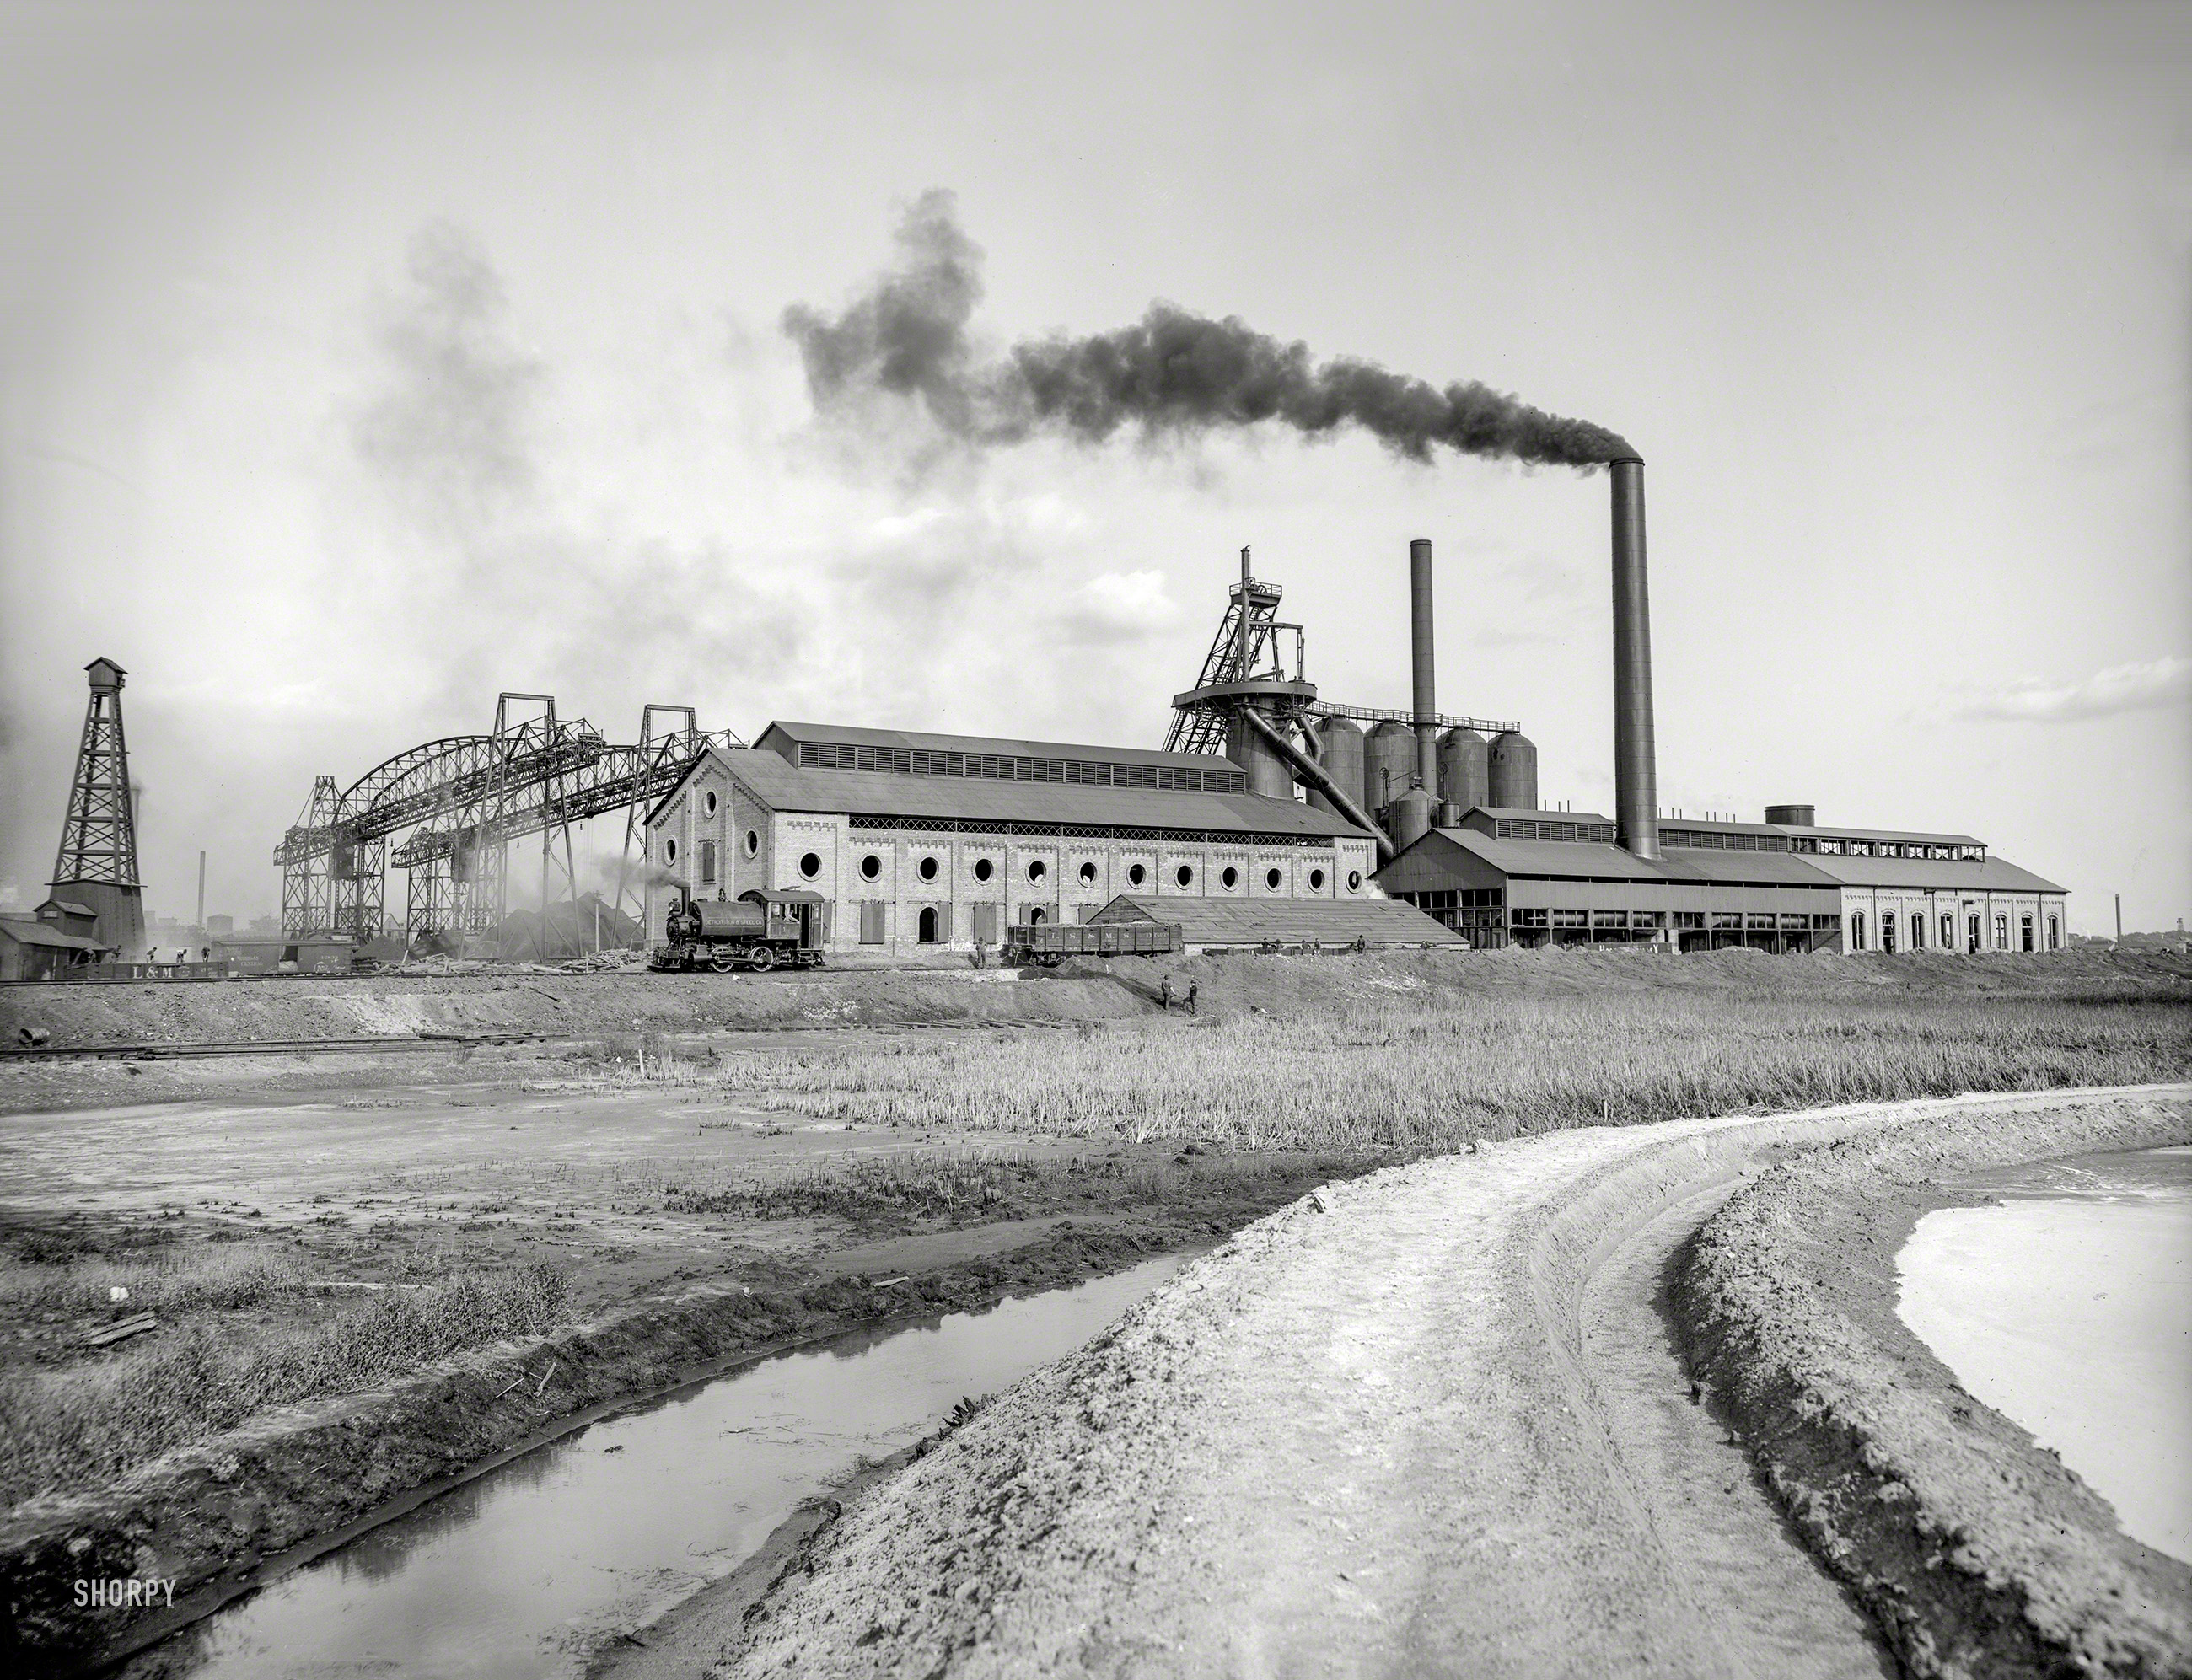 1903. "Detroit Iron and Steel Co. mill." One of the wonders of the Rust Belt. 8x10 inch dry plate glass negative, Detroit Publishing Company. View full size.